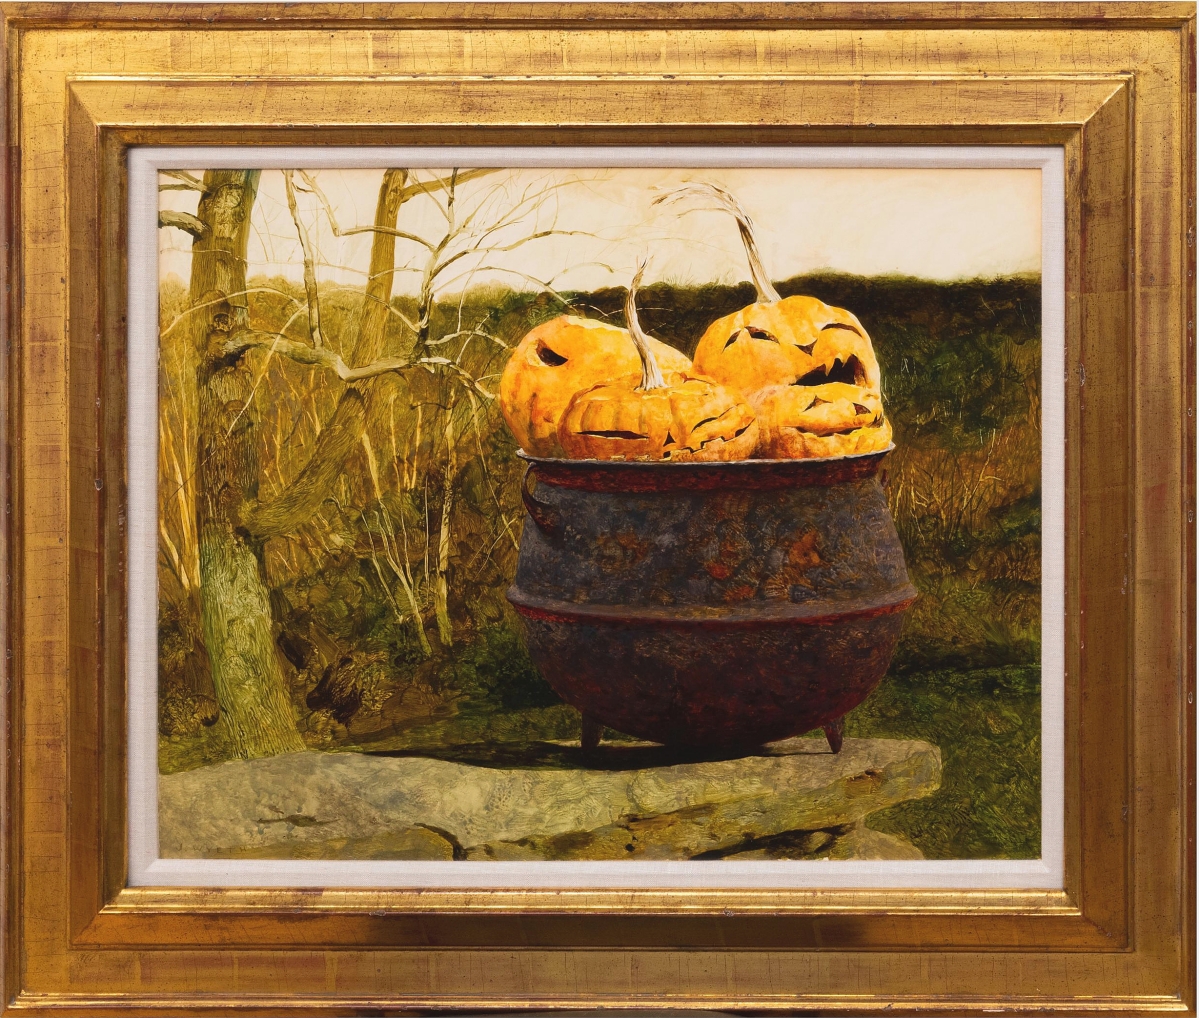 A trade buyer, bidding by phone, beat out seven other phone lines and two sizeable left bids to take Jamie Wyeth’s “After Halloween” to $86,100 ($20/40,000).